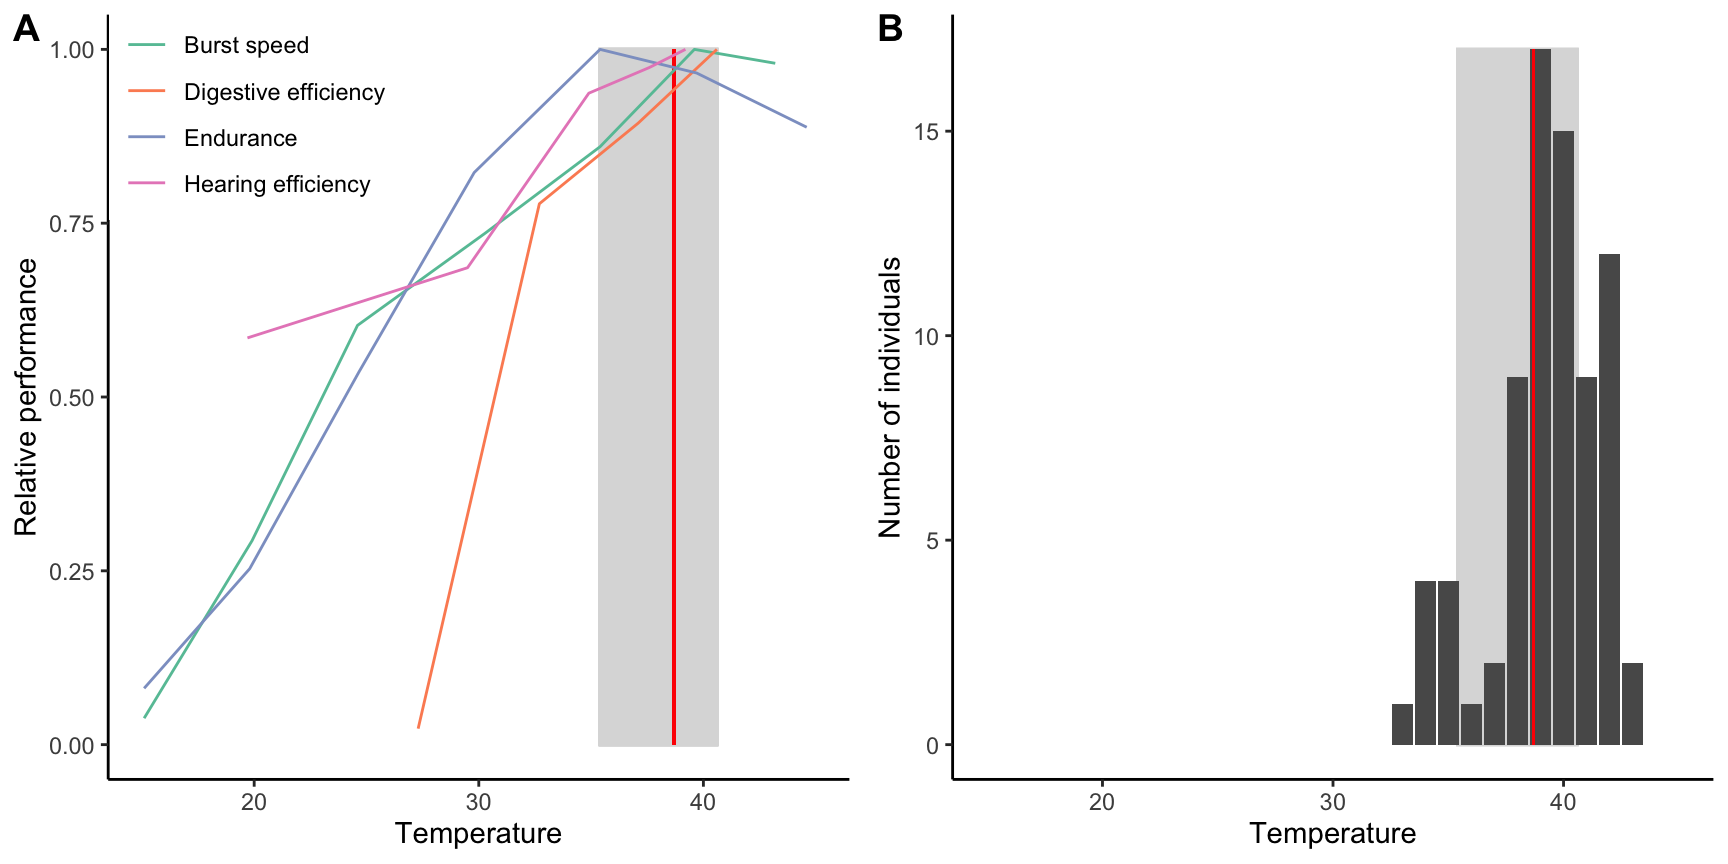 A. Thermal performance curves for different performance metrics of desert iguanas. B. Frequency distribution of body temperatures of active lizards in nature. In both panels, the zone of optimal performance is indicated by gray shading, the average optimum by the red vertical line. [Physiological performance](data/9_thermoregulation1.csv) and [body temperature](data/9_thermoregulation2.csv) data from Huey & Kingsolver (1989).